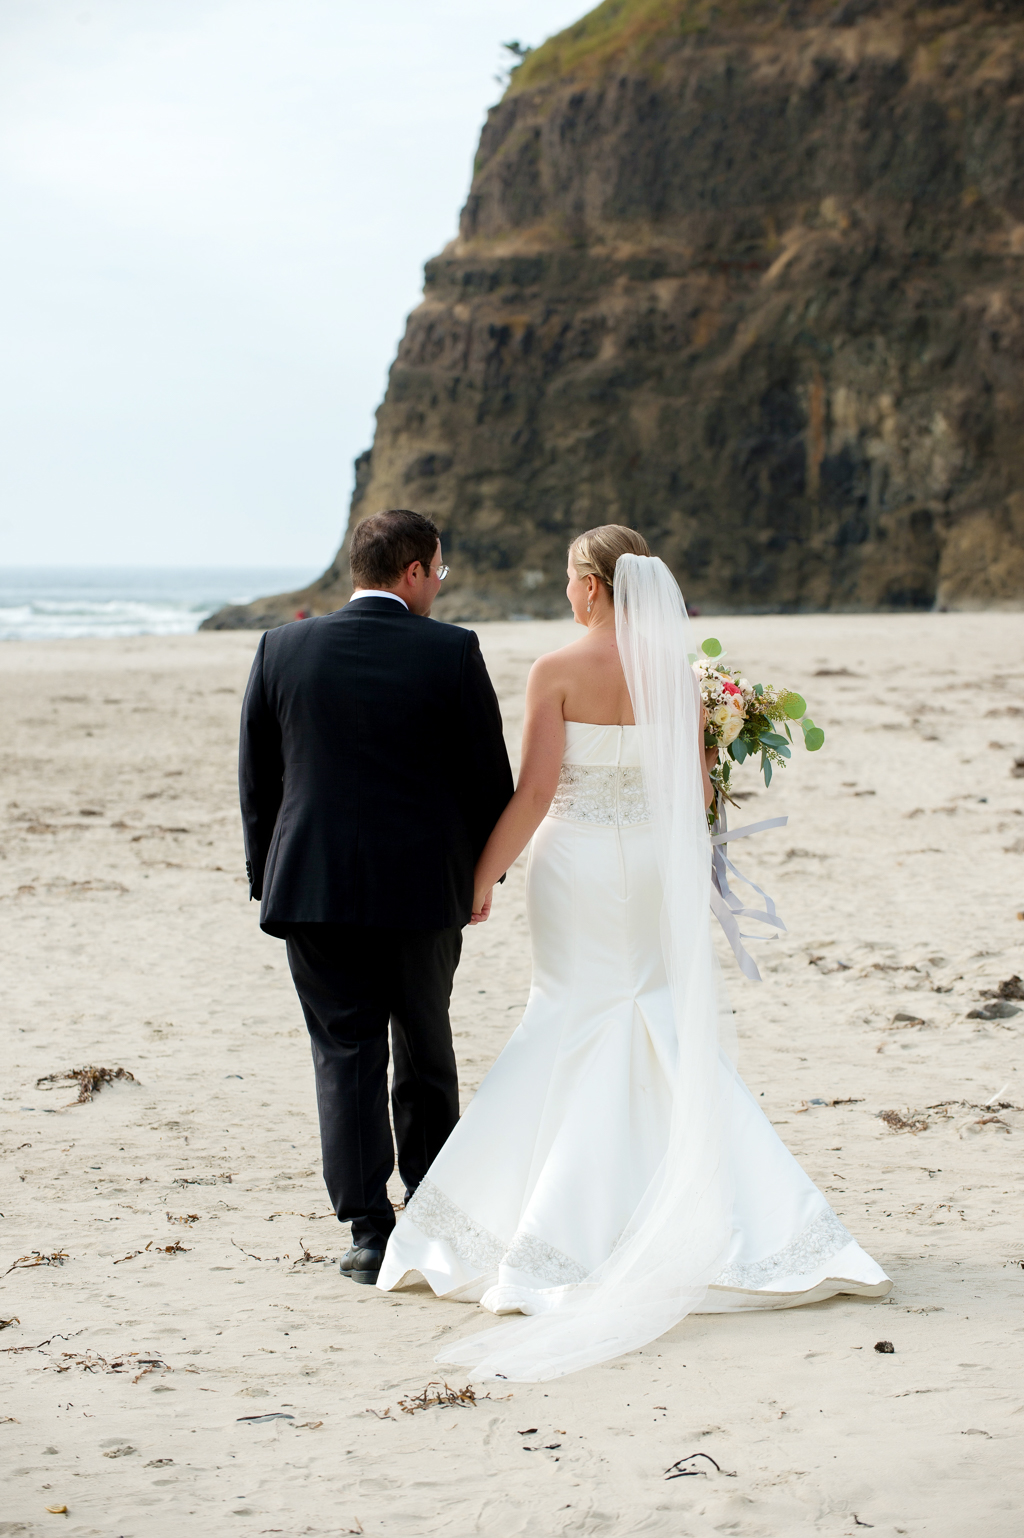 bride with a very long veil holds hands with the groom as they walk towards the ocean along the beach